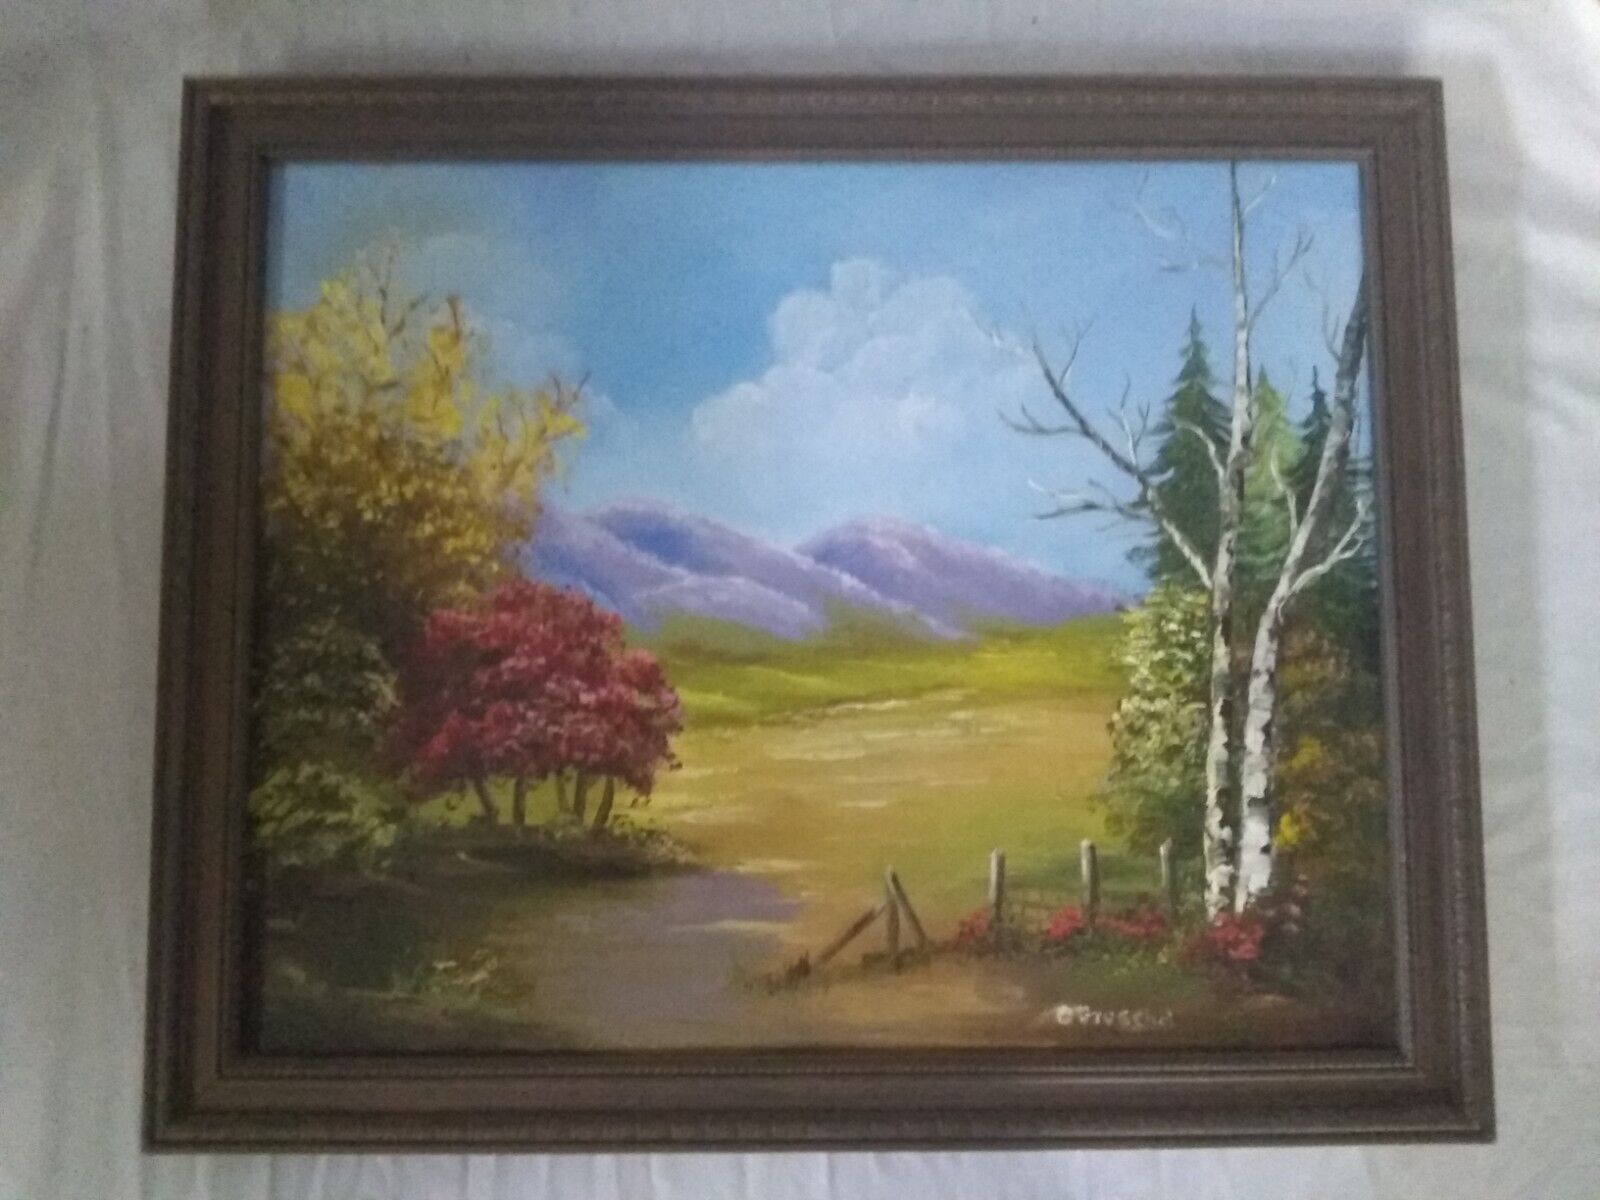 C Groschel Oil on Canvas 16 X 21 Canvas with frame 18X 23. Mountains Valley Wood